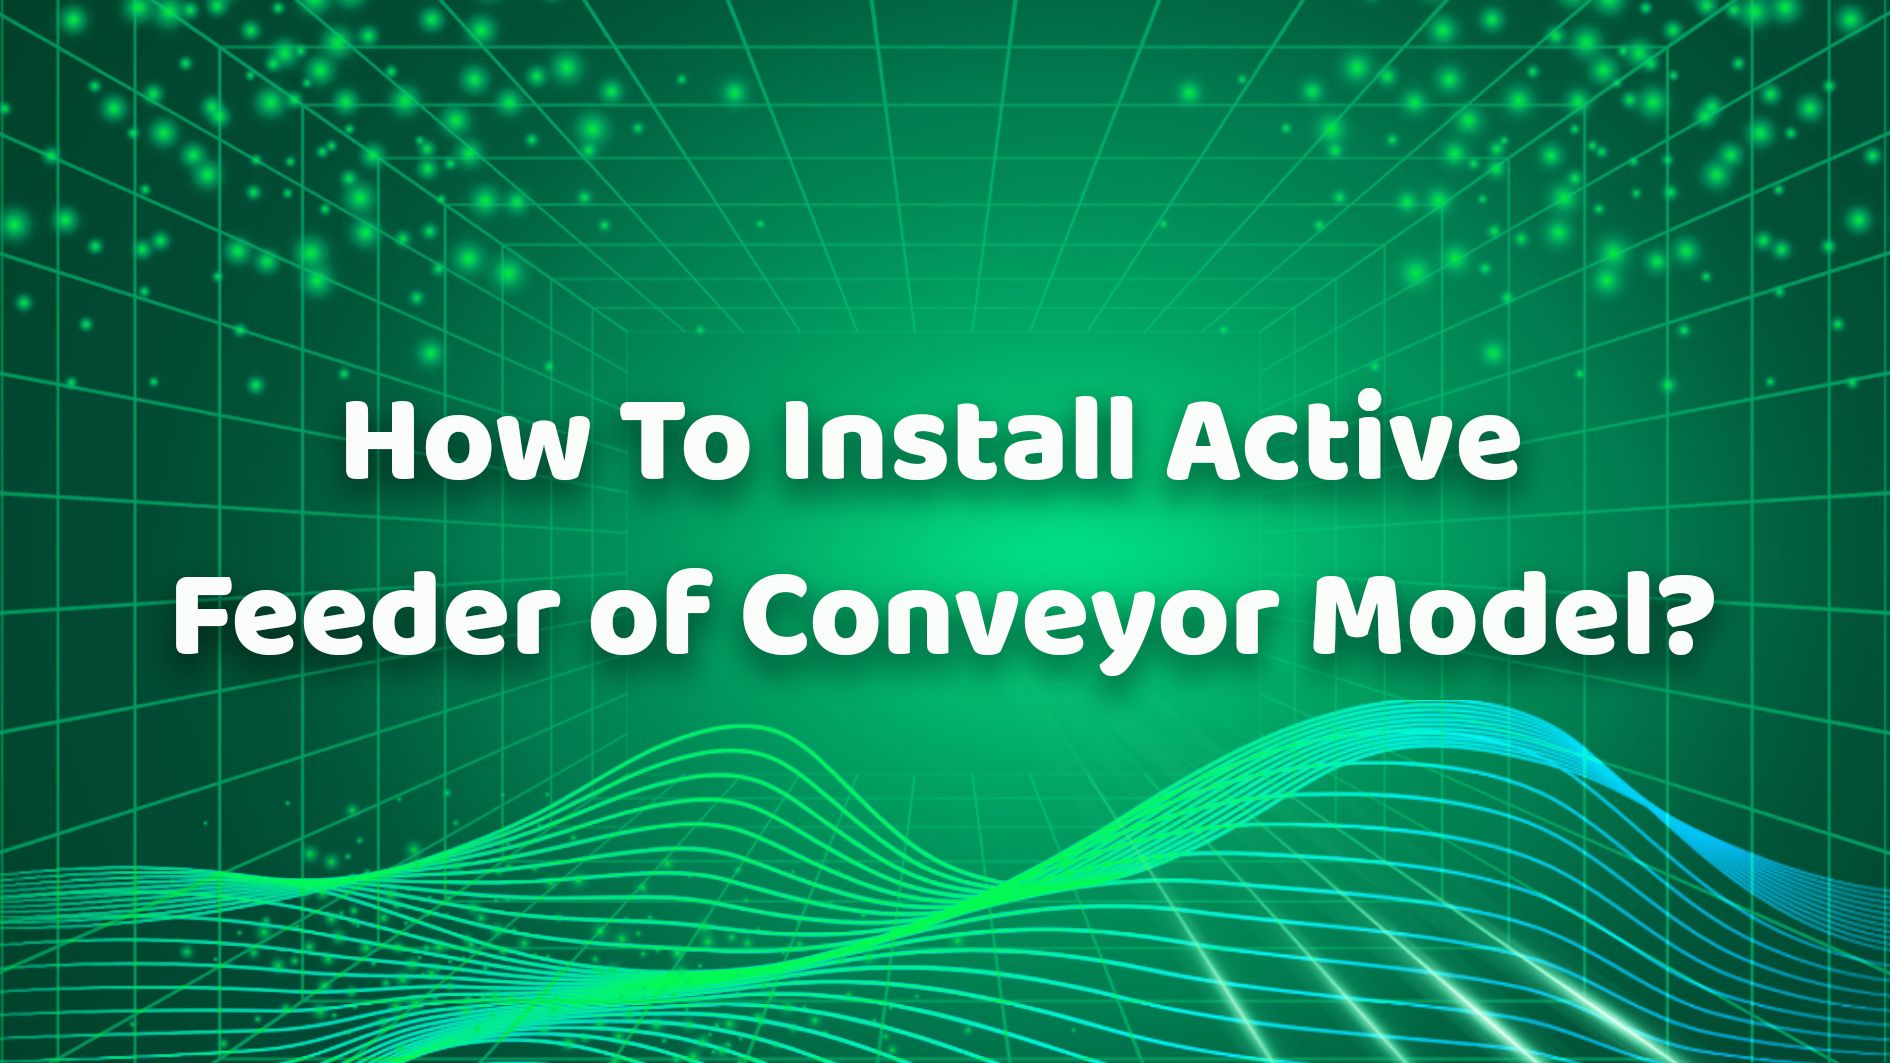 How To Install Active Feeder of Conveyor Model？